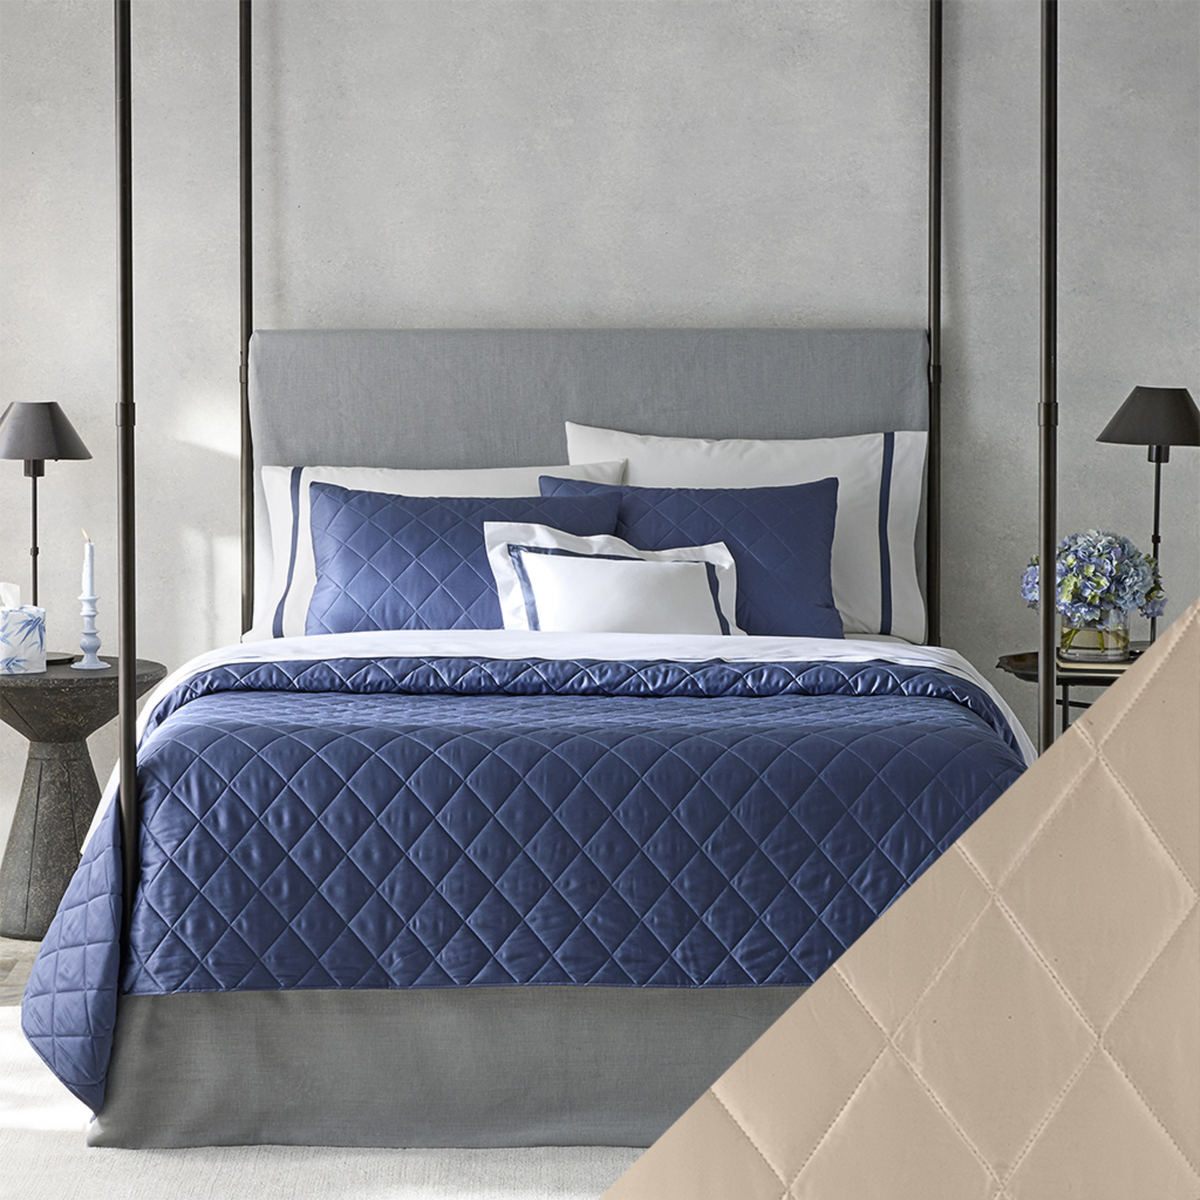 Matouk Nocturne Bedding Main Image with Swatch in Khaki